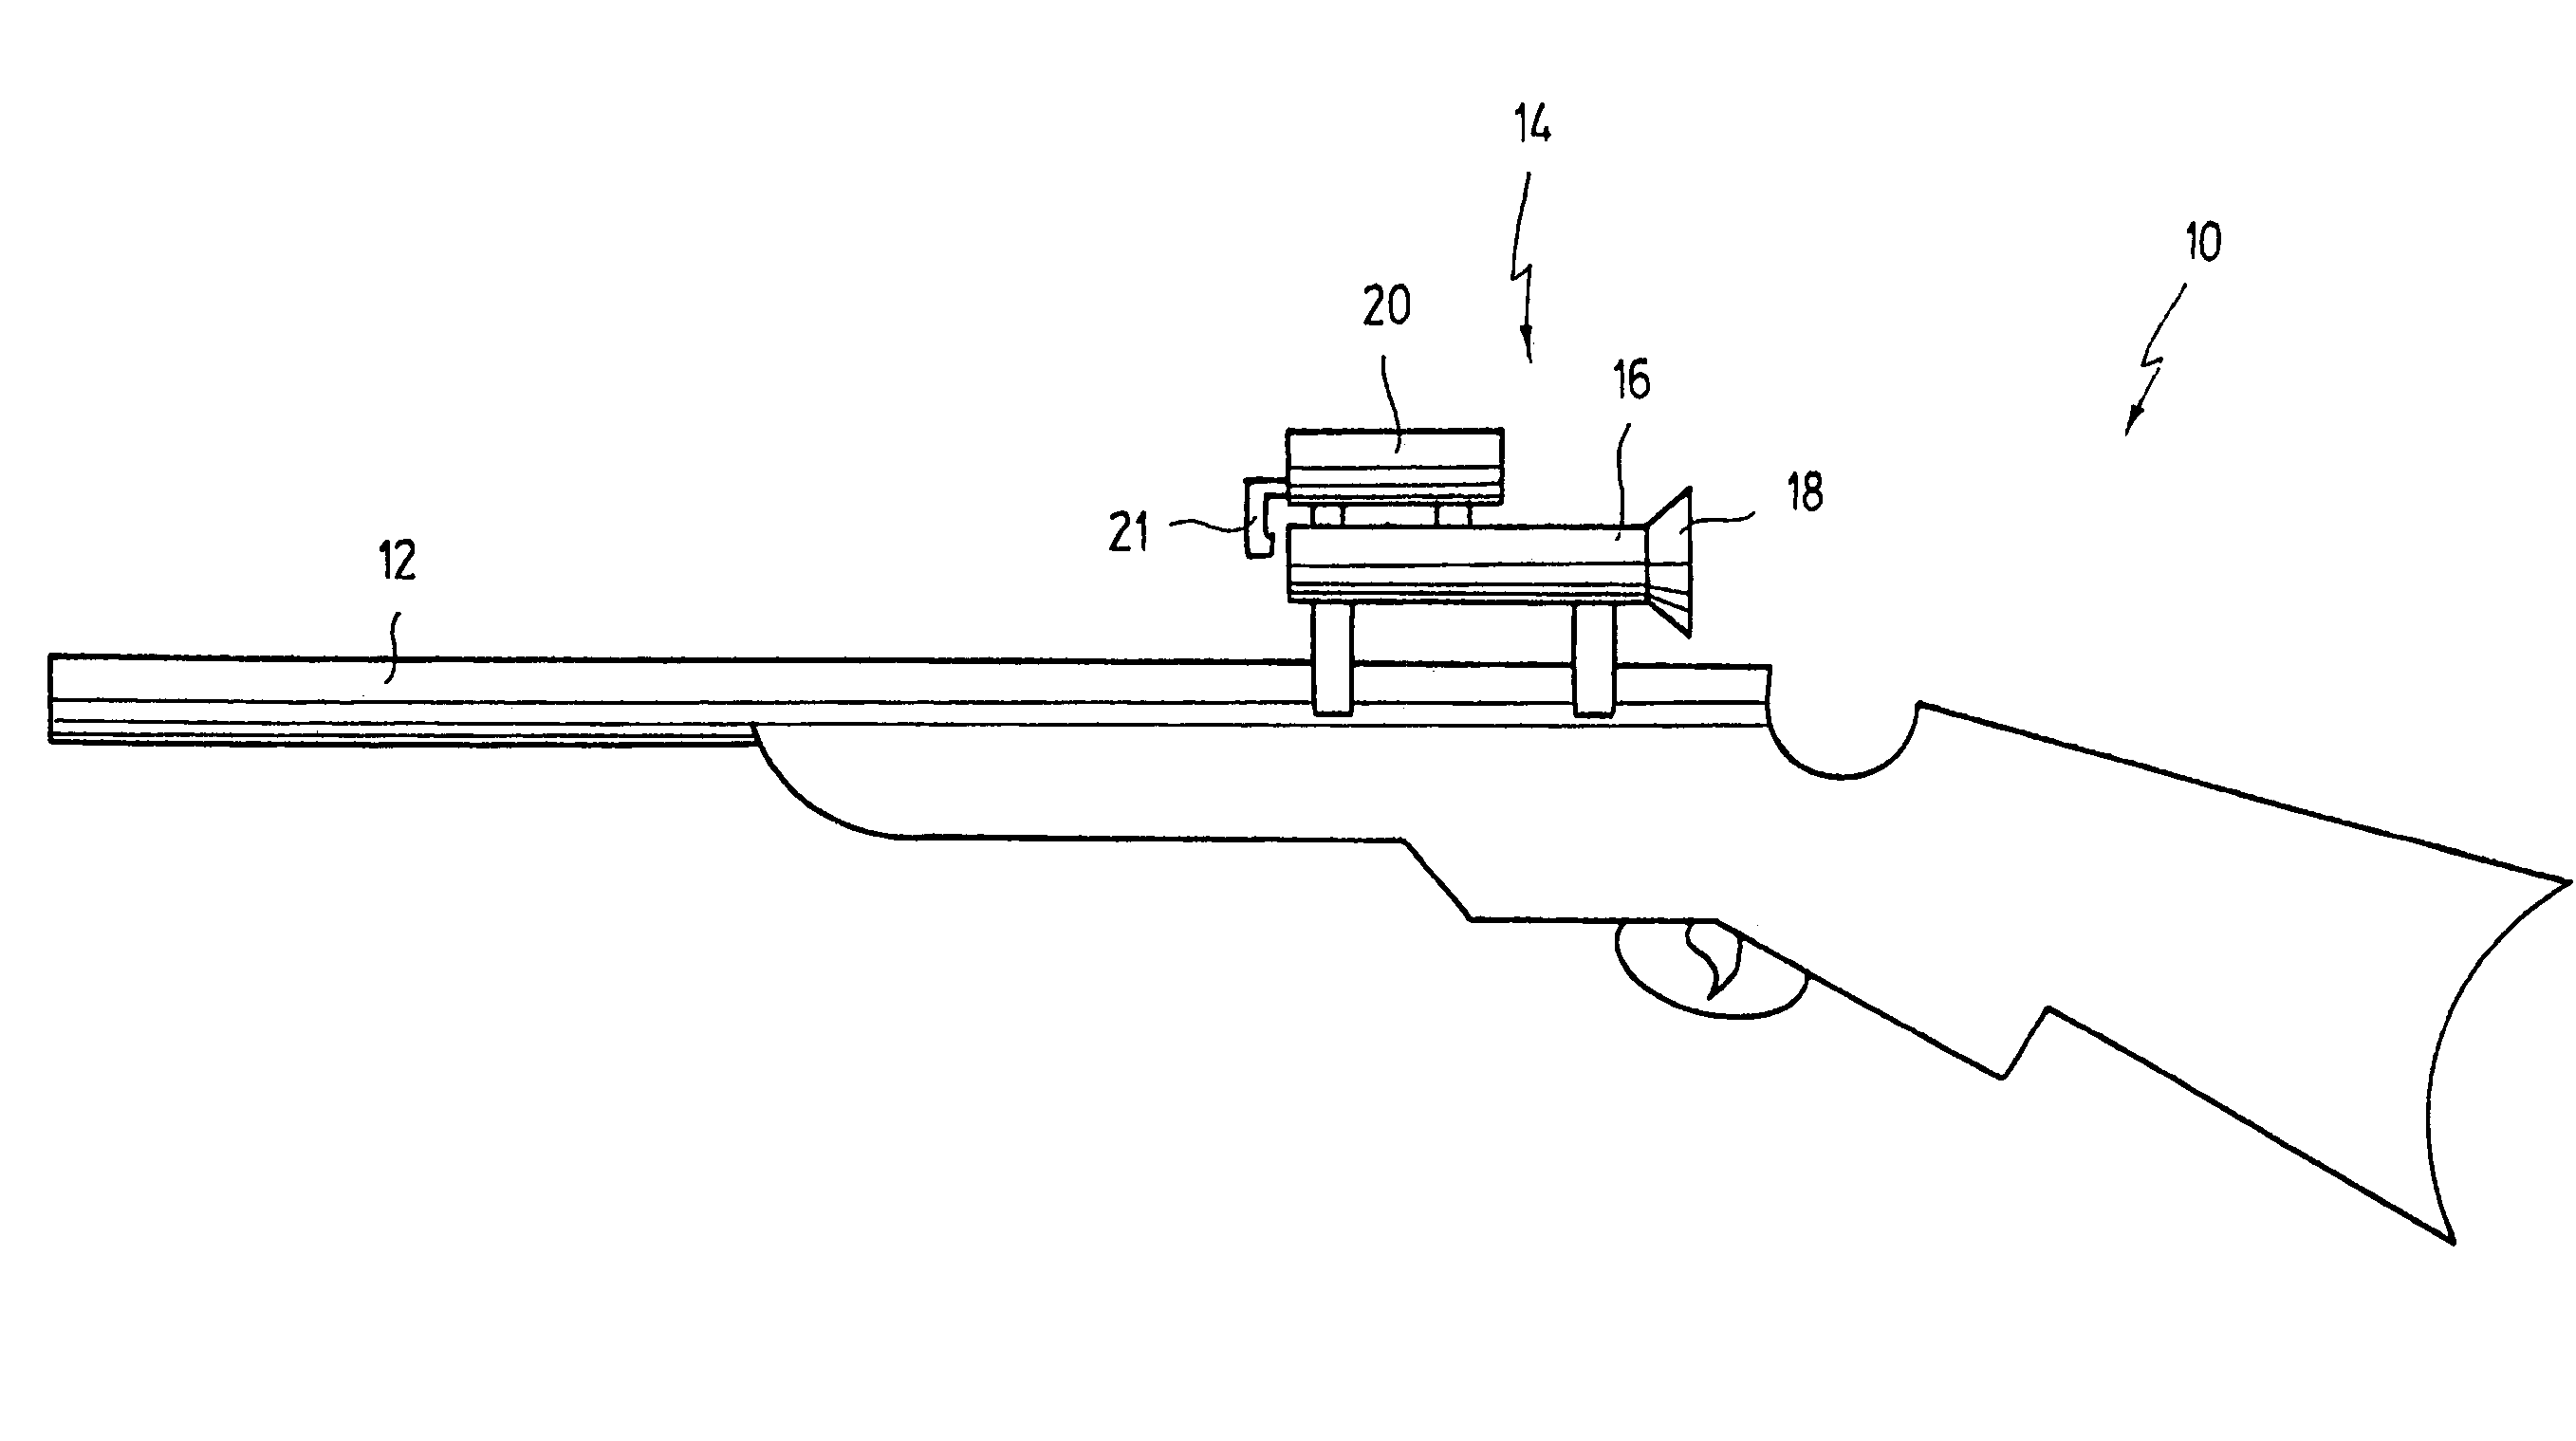 Apparatus and method for detecting optical systems in a terrain